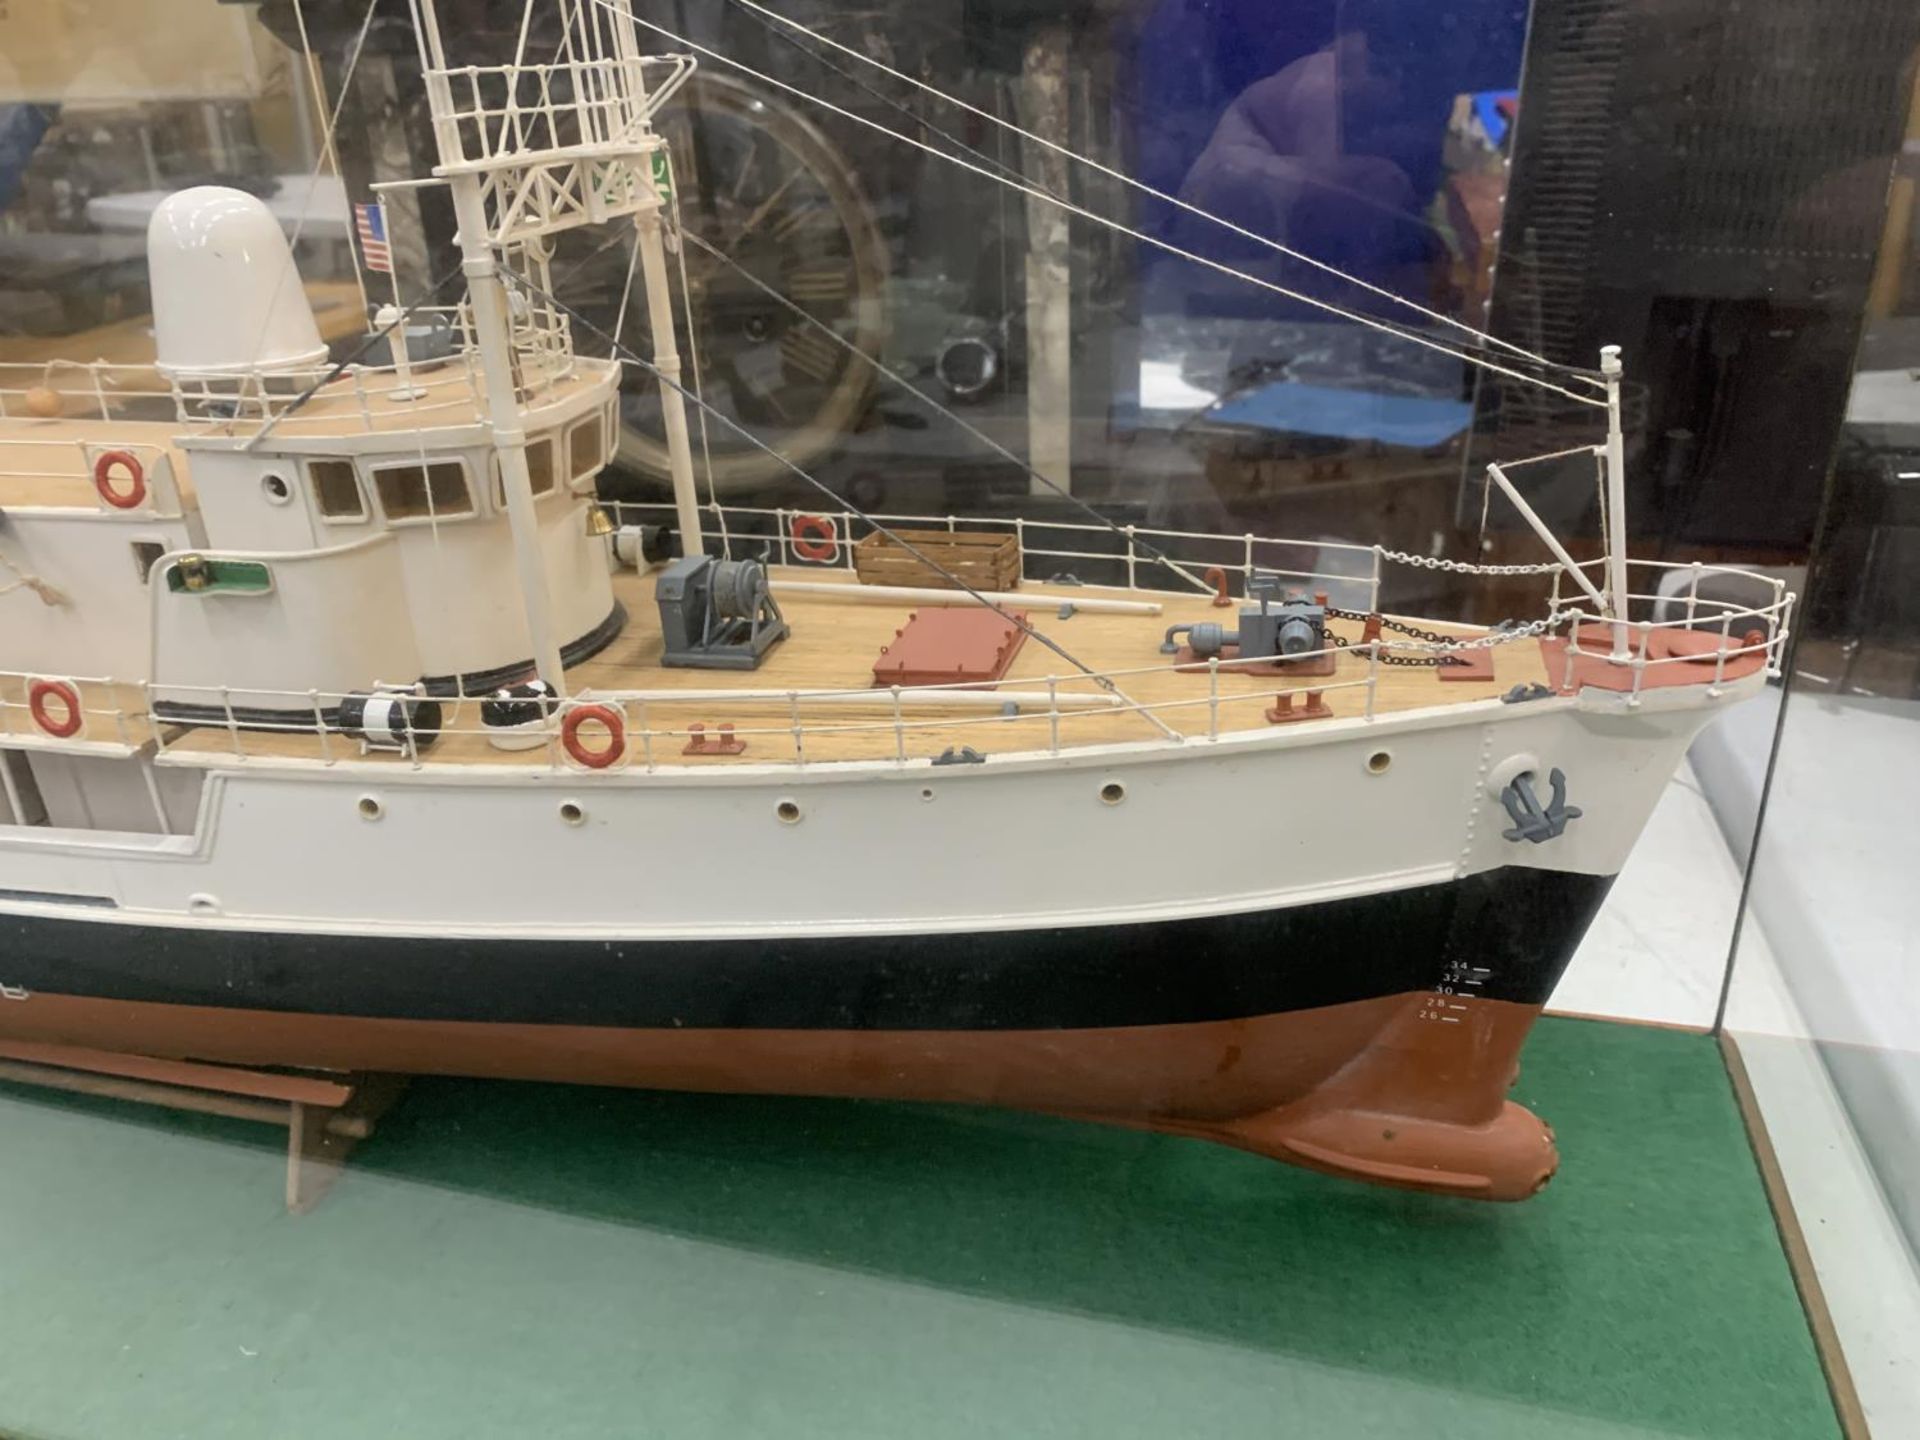 A LARGE MODEL OF A BOAT WITH HELICOPTER IN A GLASS CASE - Bild 4 aus 5